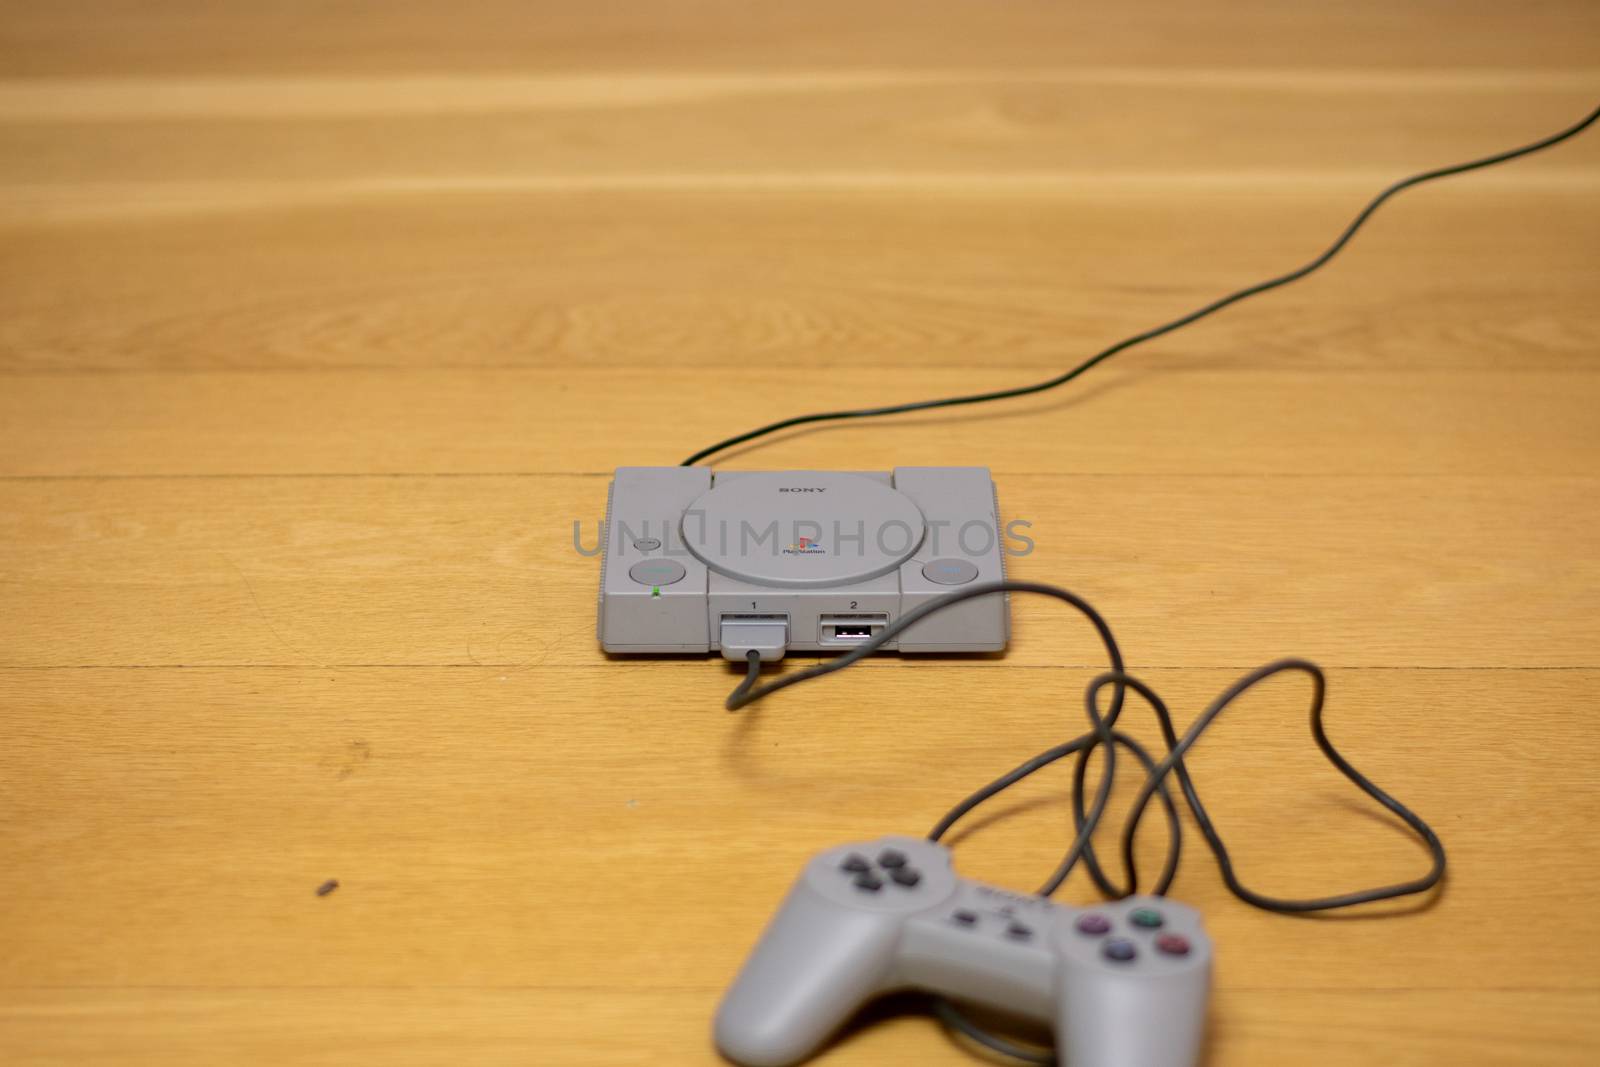 The Playstation Classic Edition. A recreation model of the original Playstation, On a Wooden Floor.